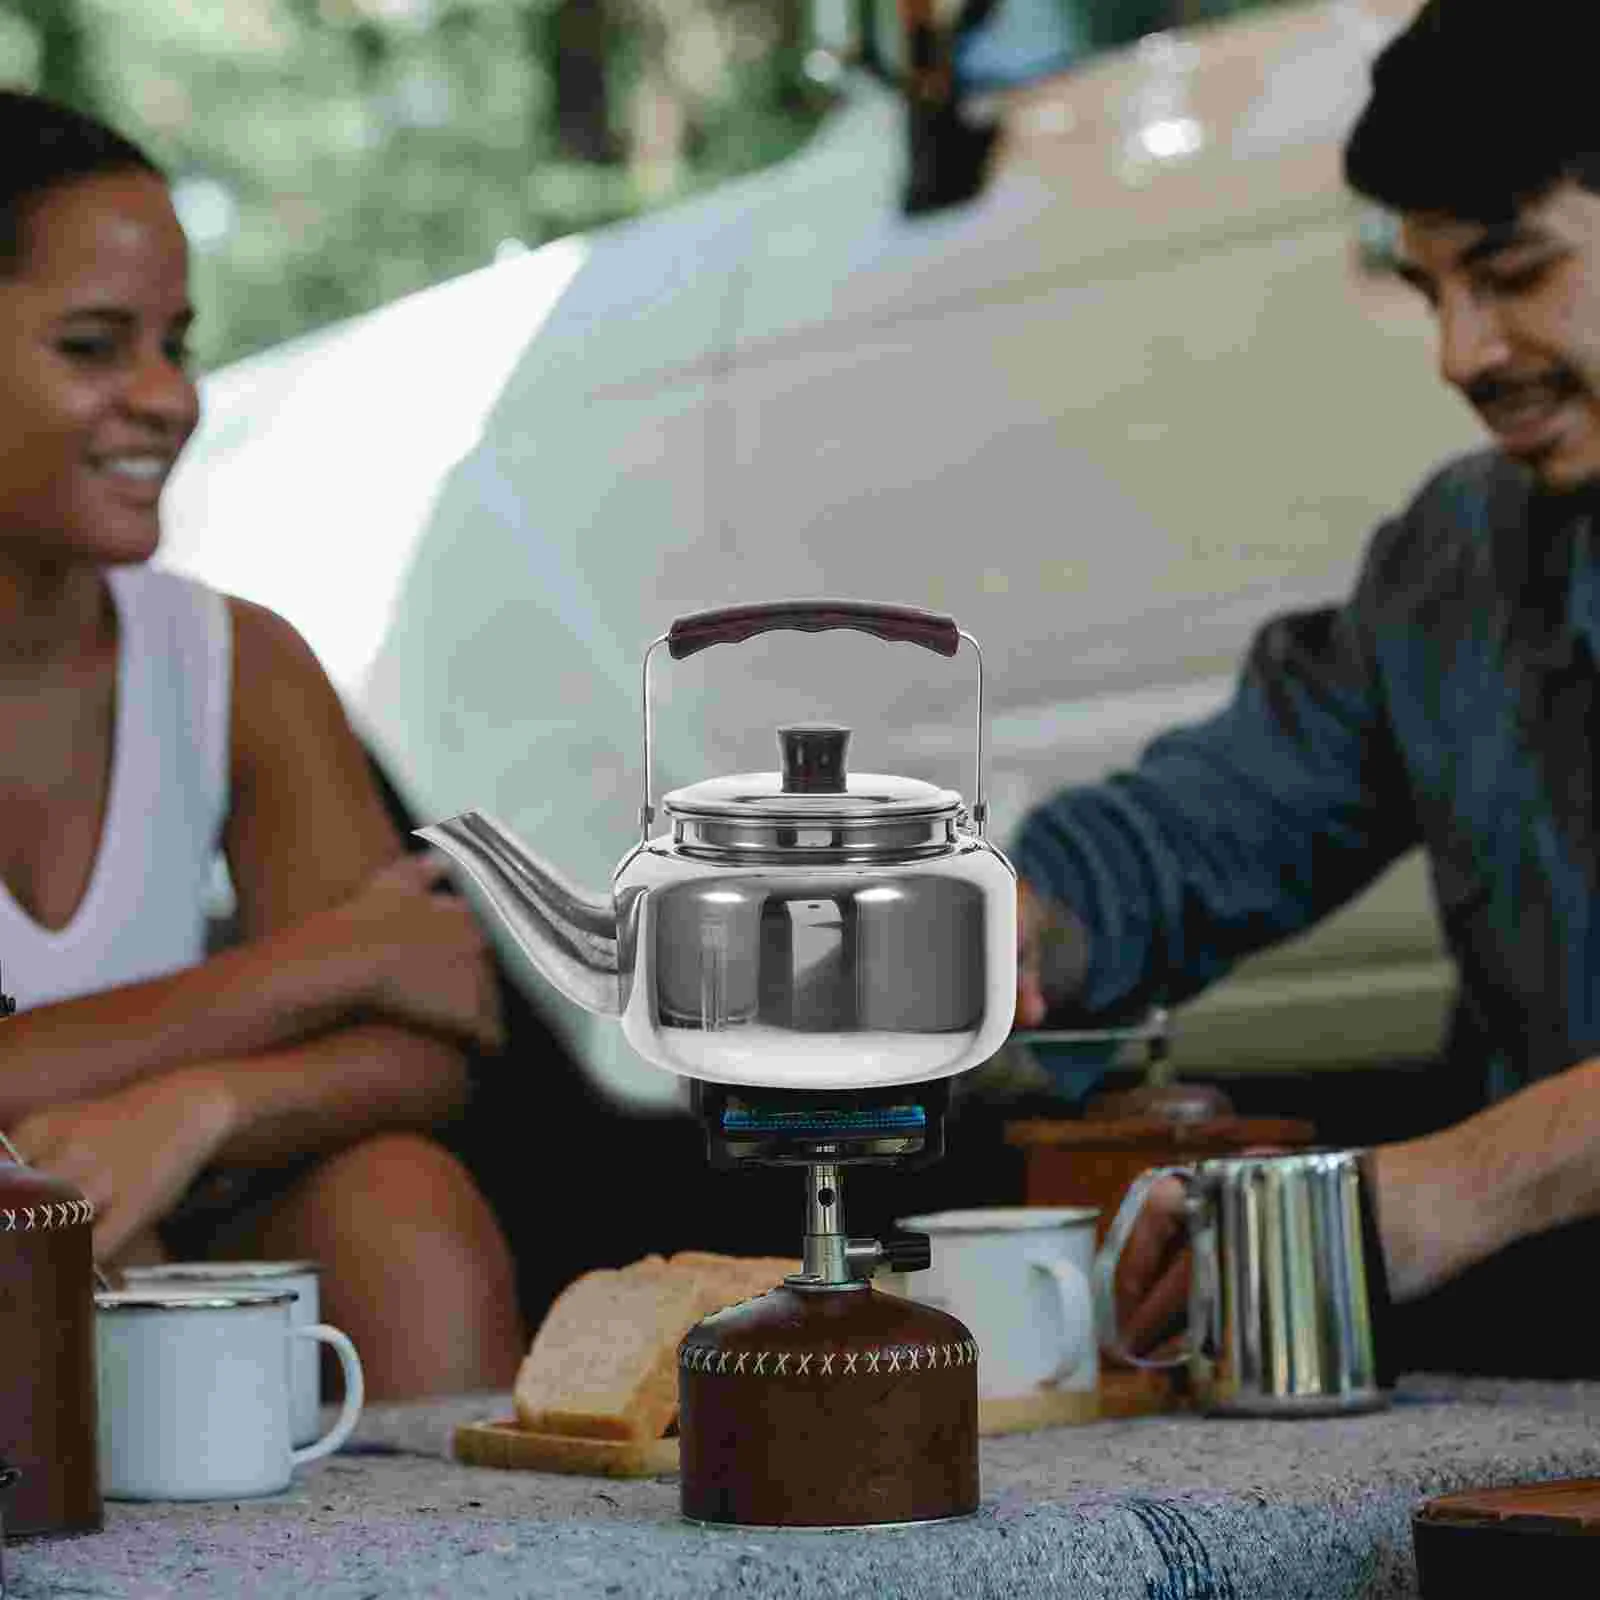 

Kettle Tea Water Stovetop Stainless Whistling Steel Teapotpot Stoveboiling Boiler Hot Camping Induction Gas Loud Whistle Coffee